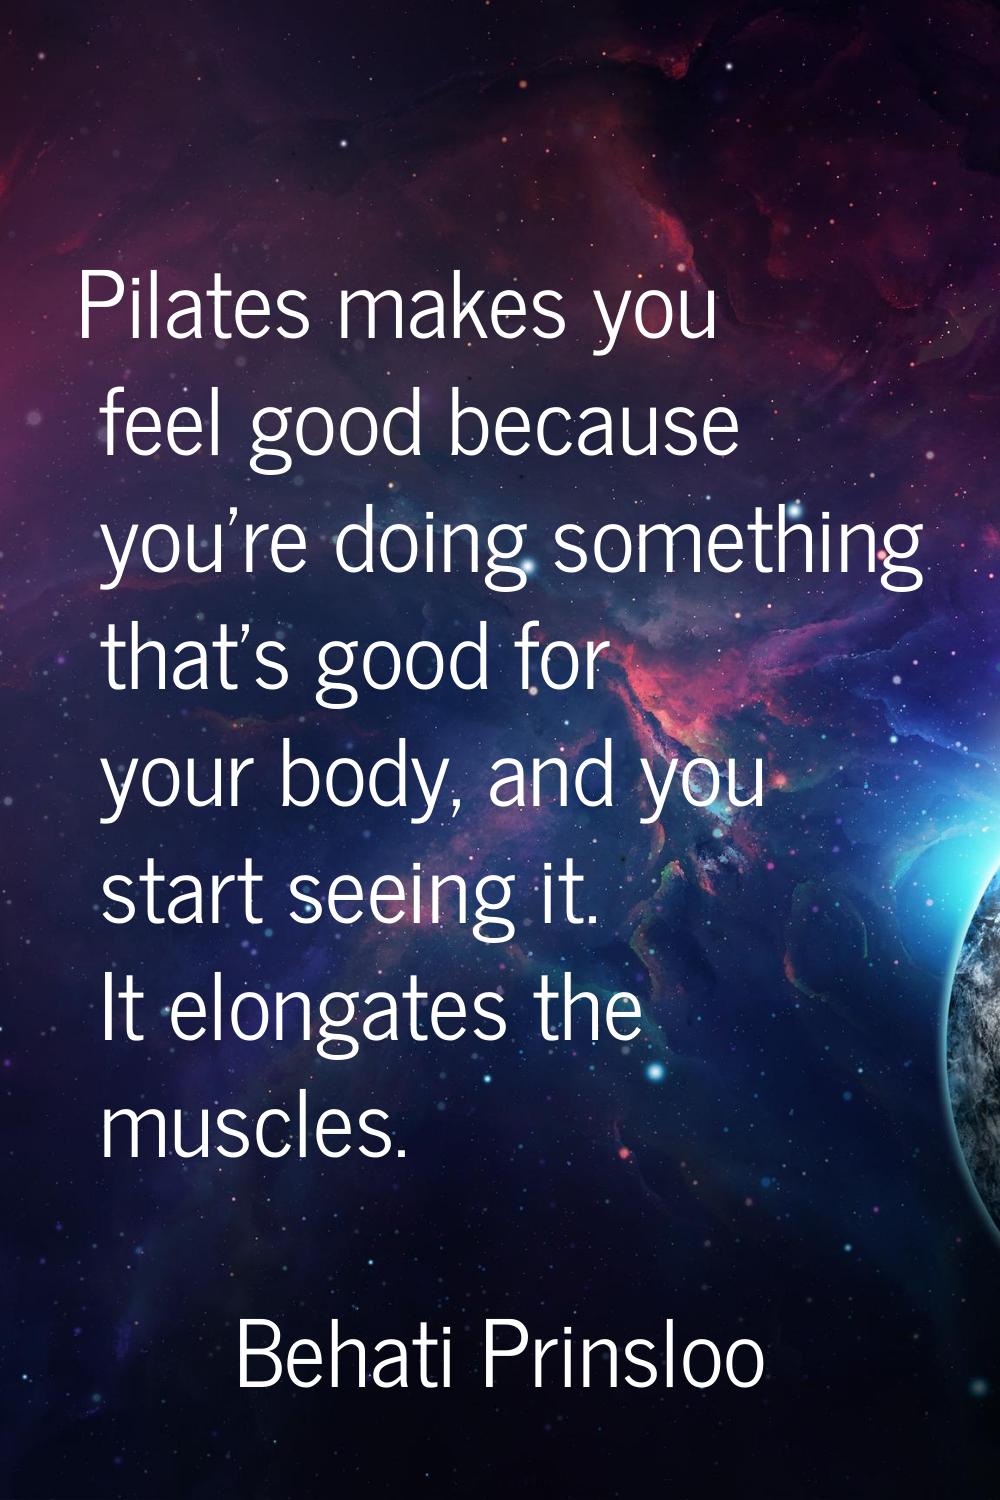 Pilates makes you feel good because you're doing something that's good for your body, and you start